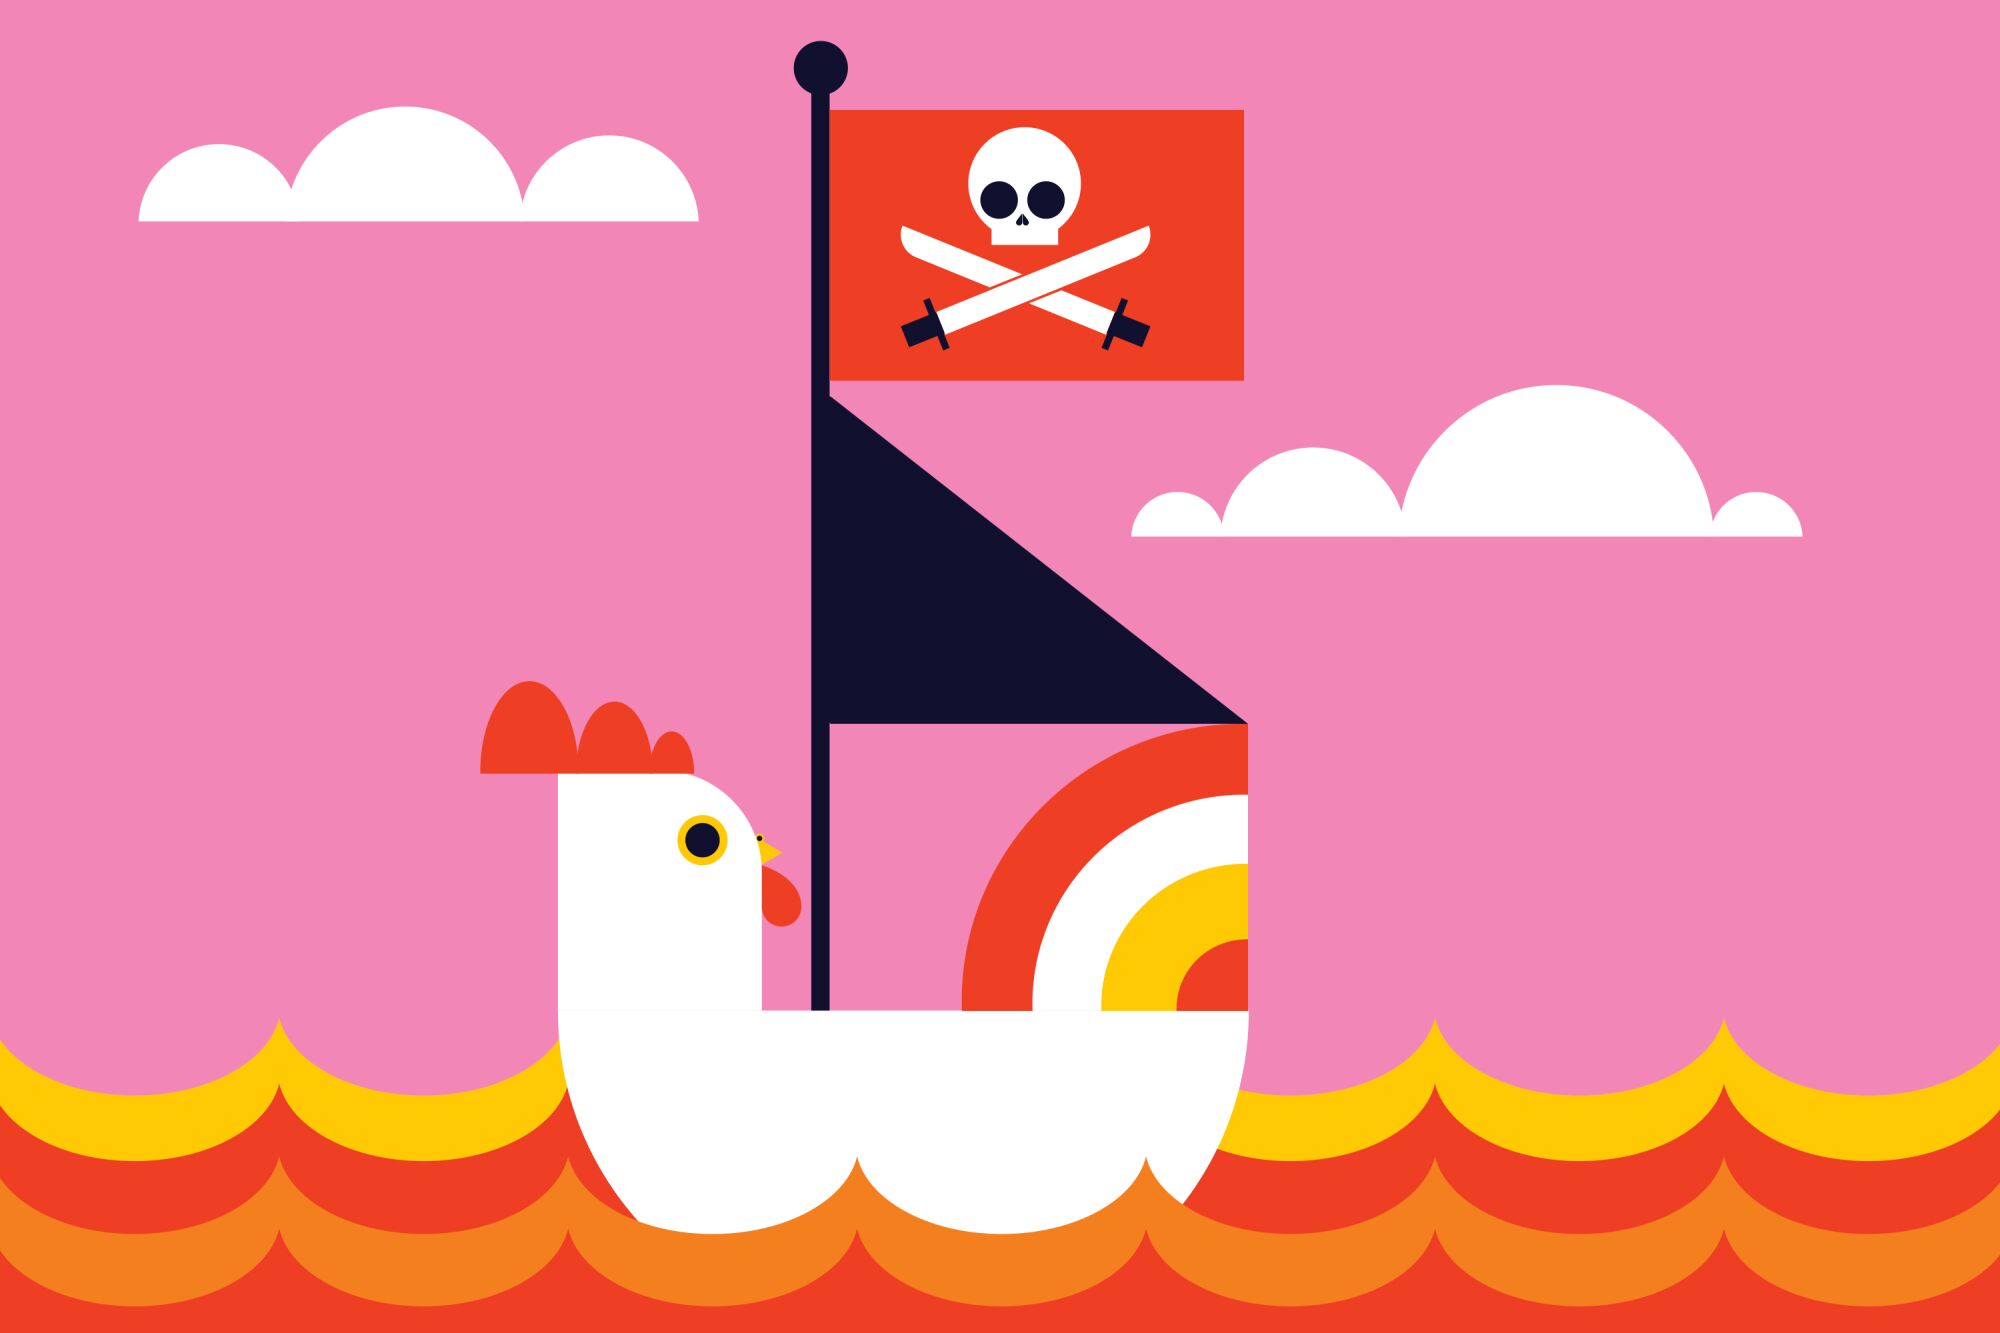 An illustration of a pirates ship in the shape of a chicken.